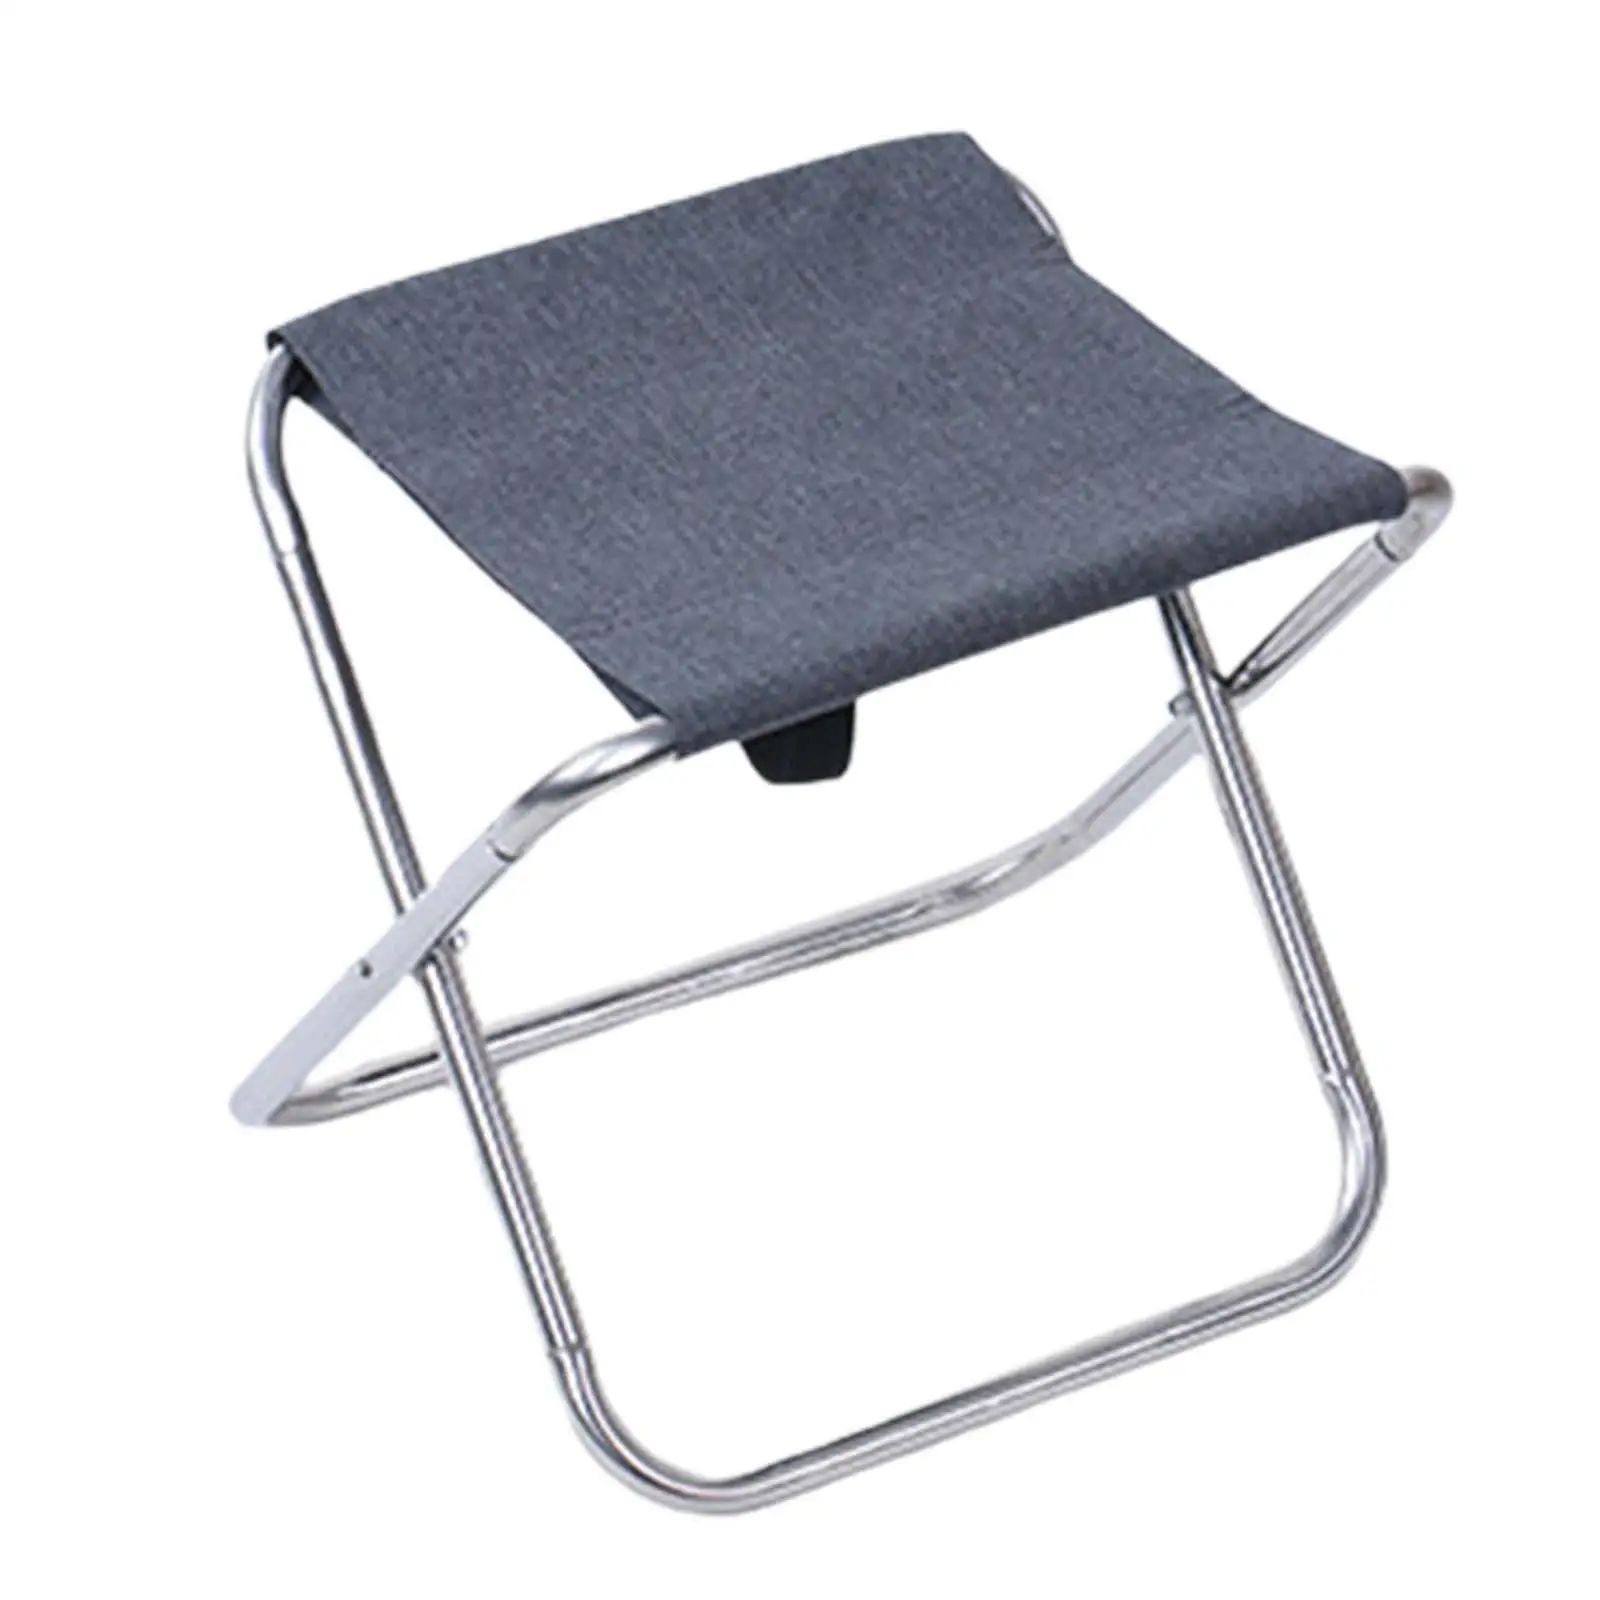 Folding Stool Camping Outdoor Foldable Lightweight Fishing Seat Reusable Saddle Chair for Garden Travel Backyard Hiking Party